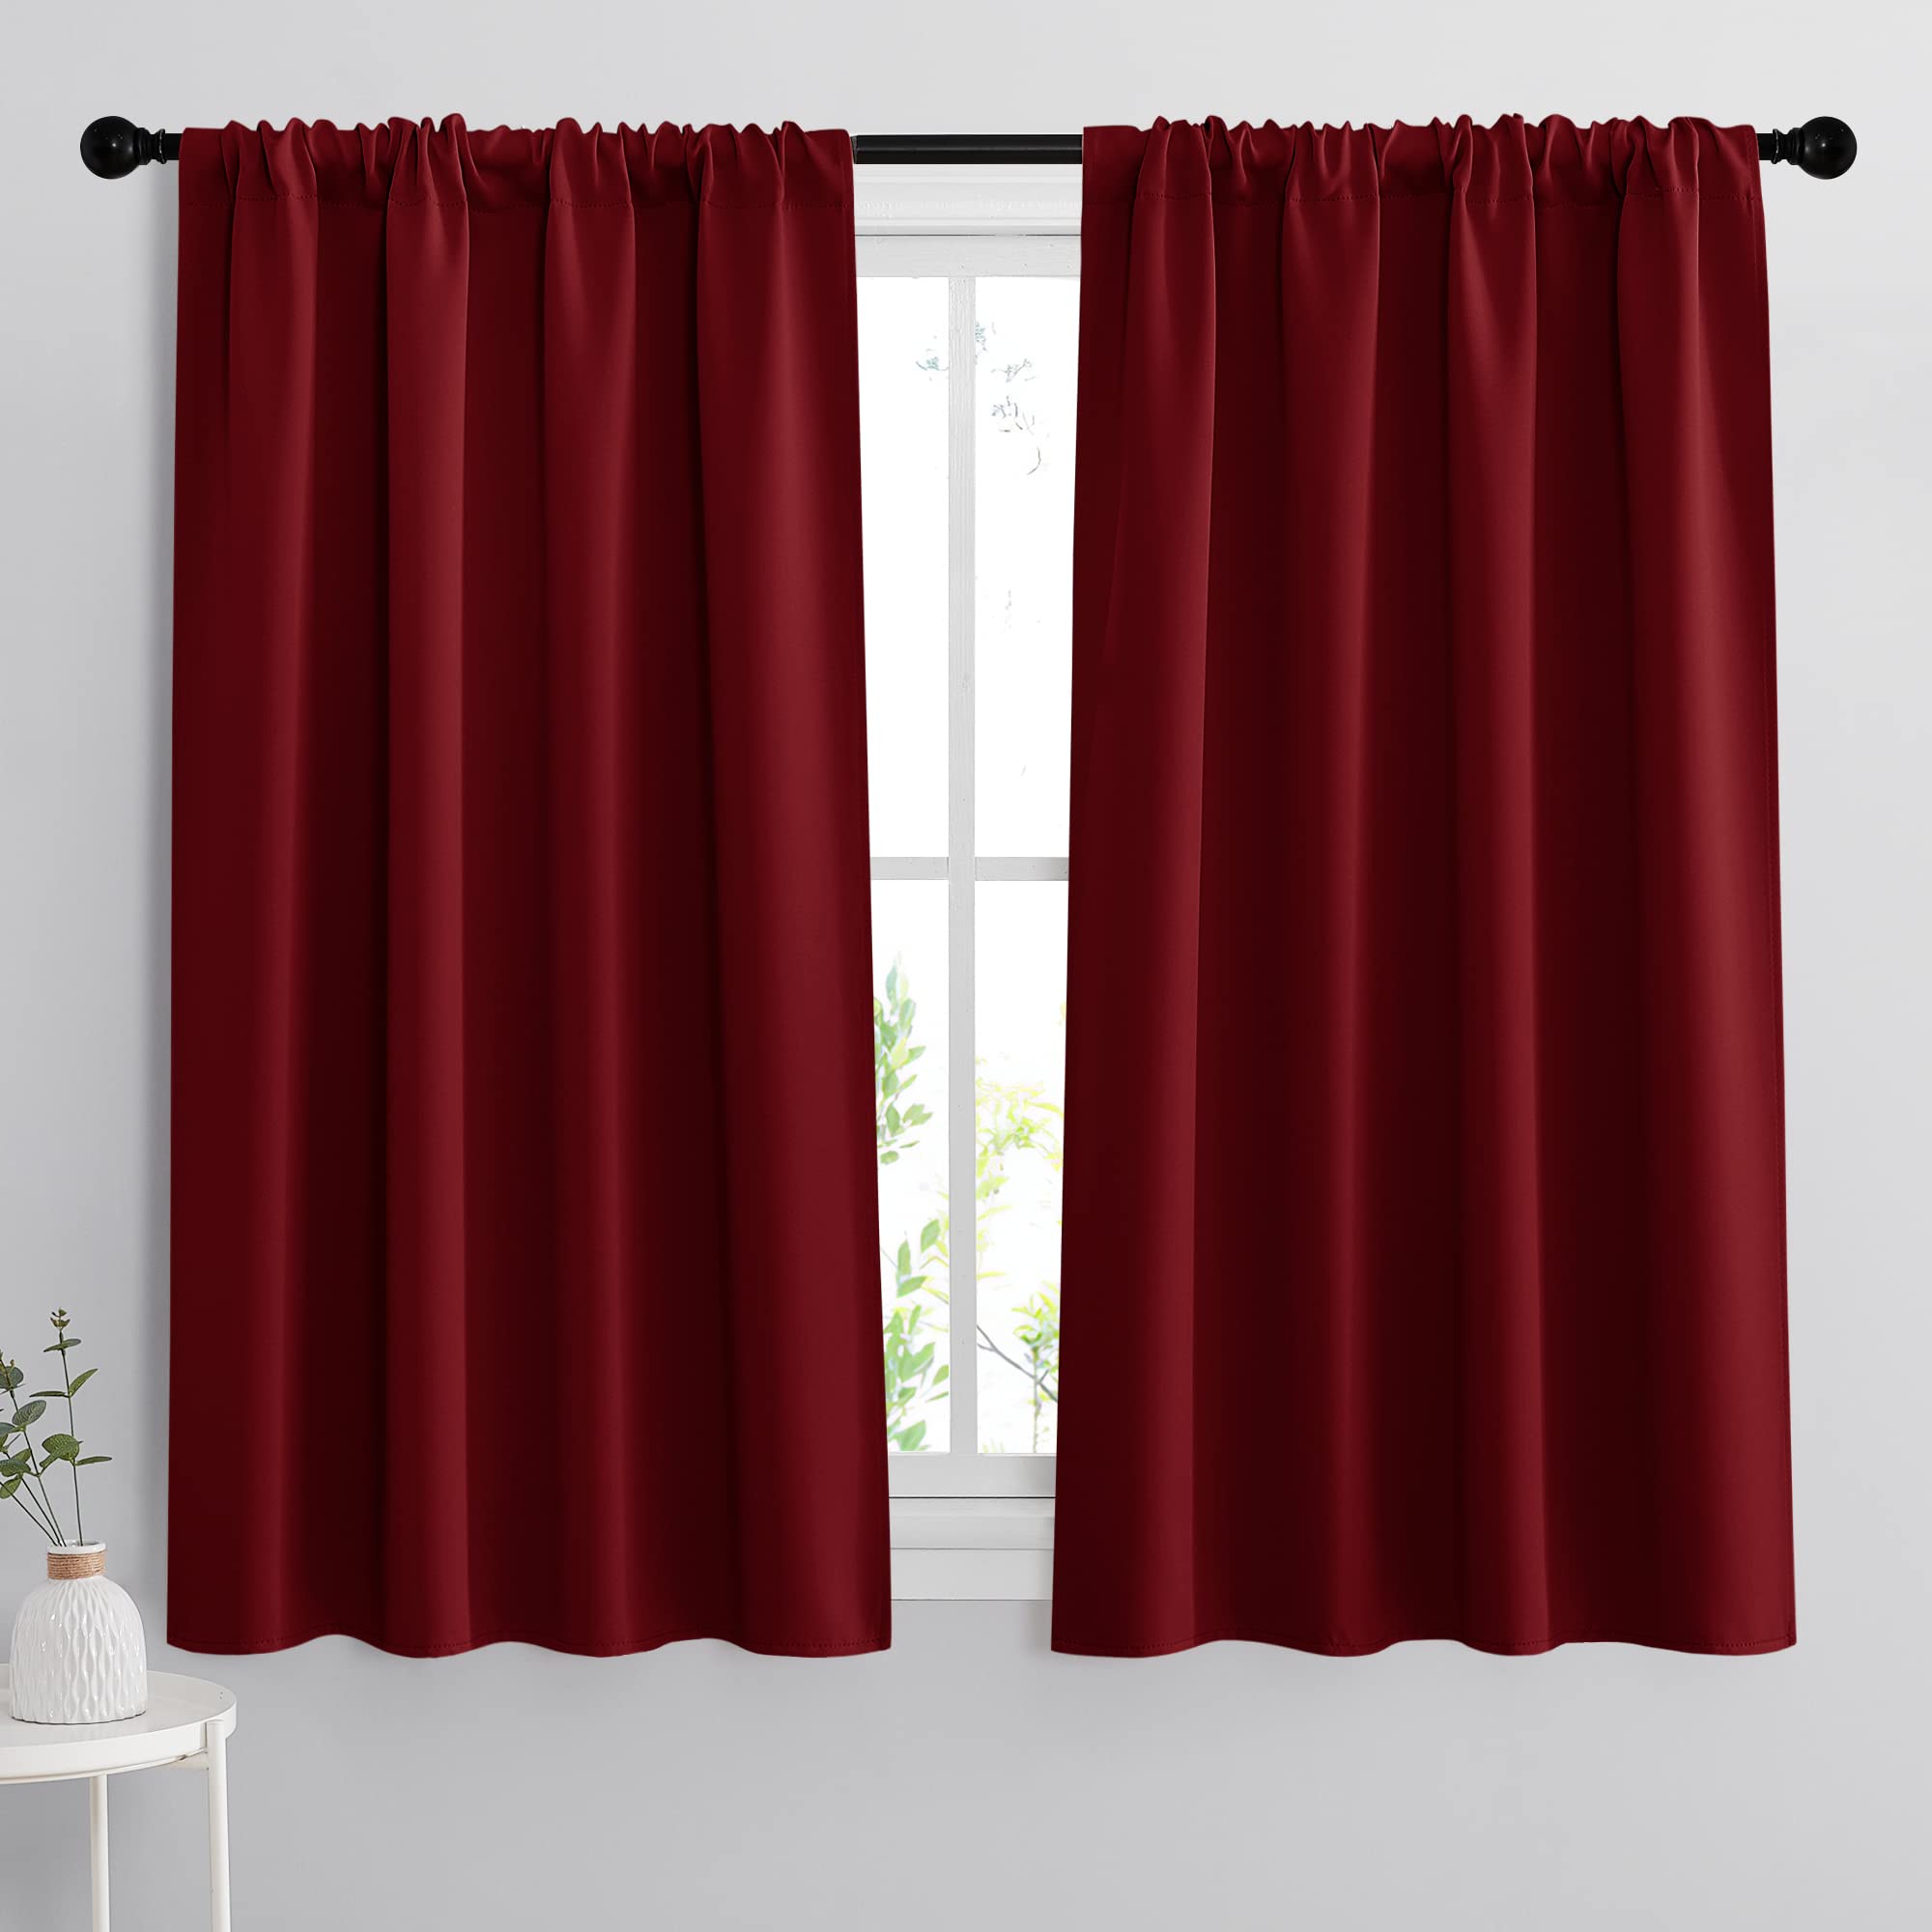 RYB HOME Small Window curtains - Room Darkening Windows coverings Light Block Energy Efficiency Solid Drapes for Bedroom Kitchen